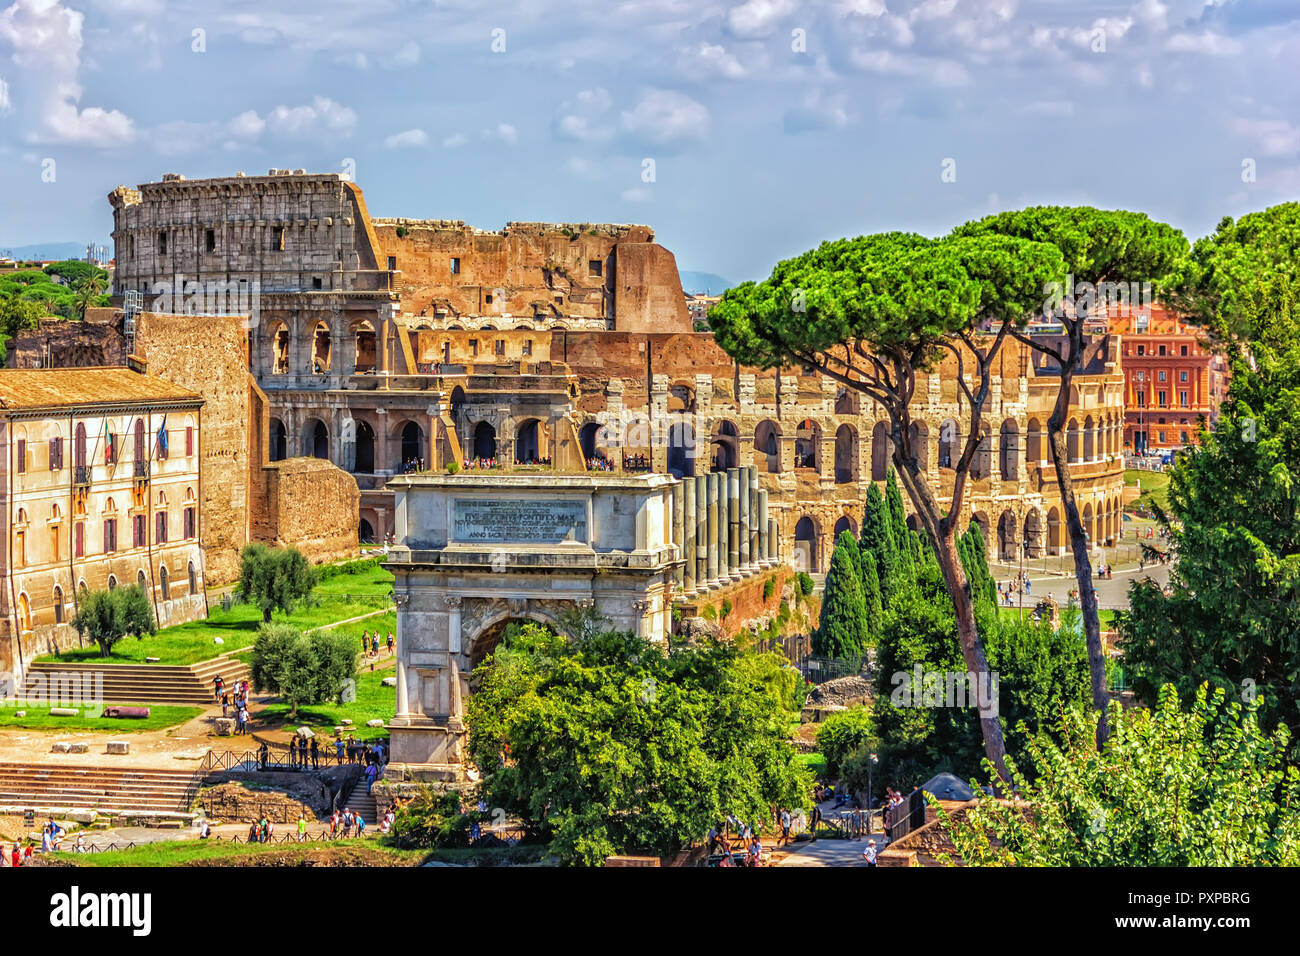 View from the Roman Forum on the Arch of Titus and the Colosseum, summer cloudy day Stock Photo